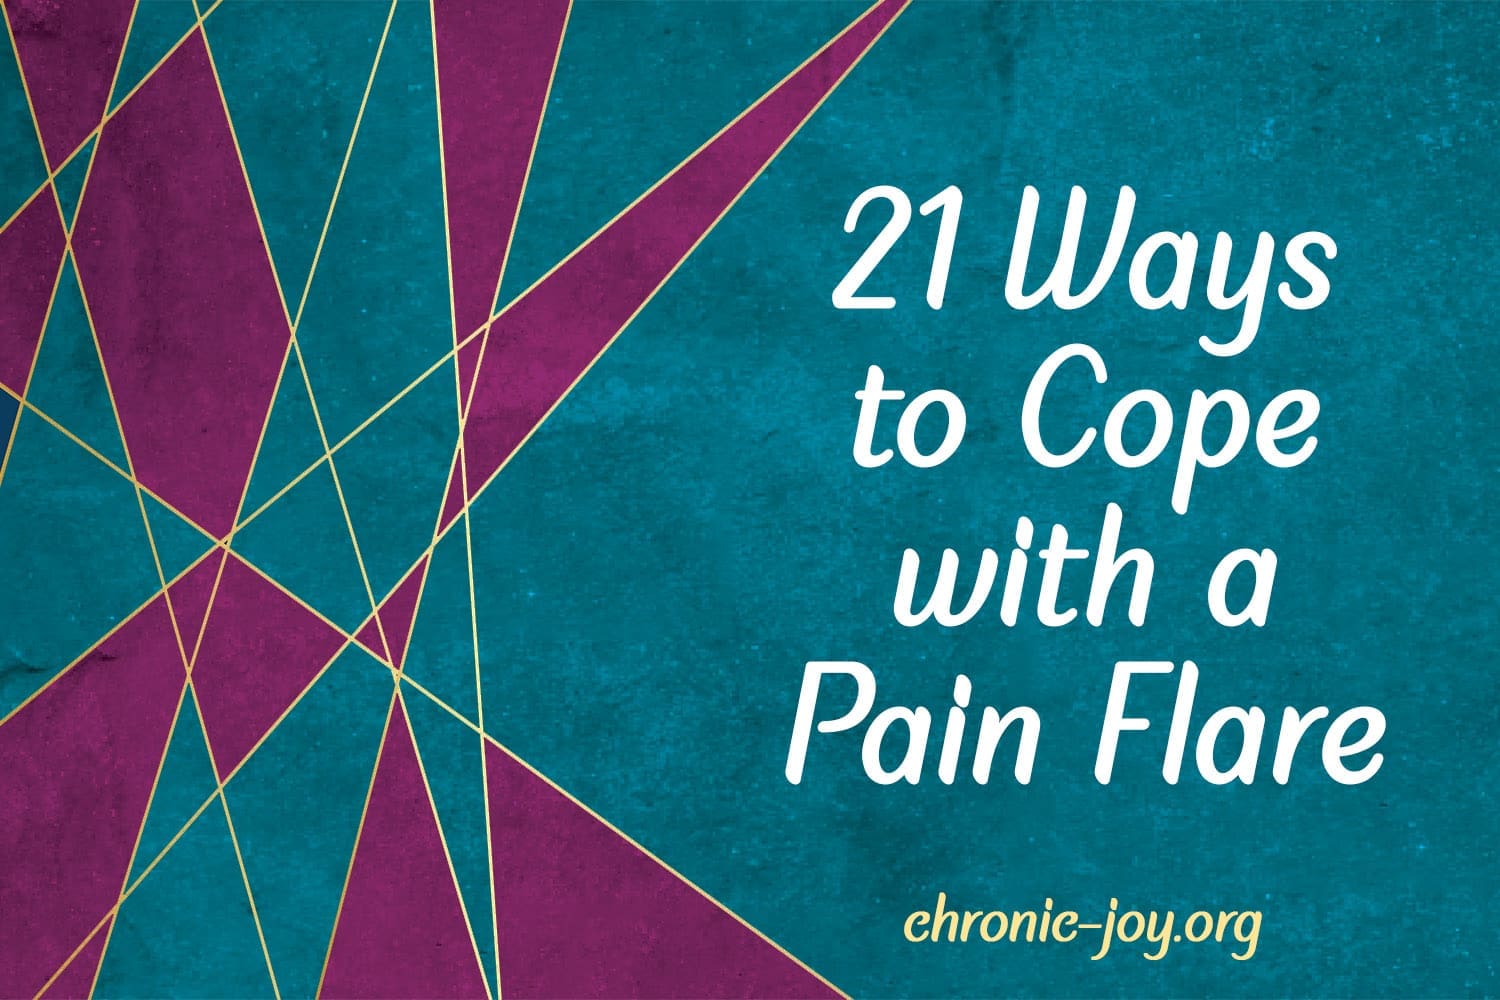 21 Ways to Cope with a Pain Flare